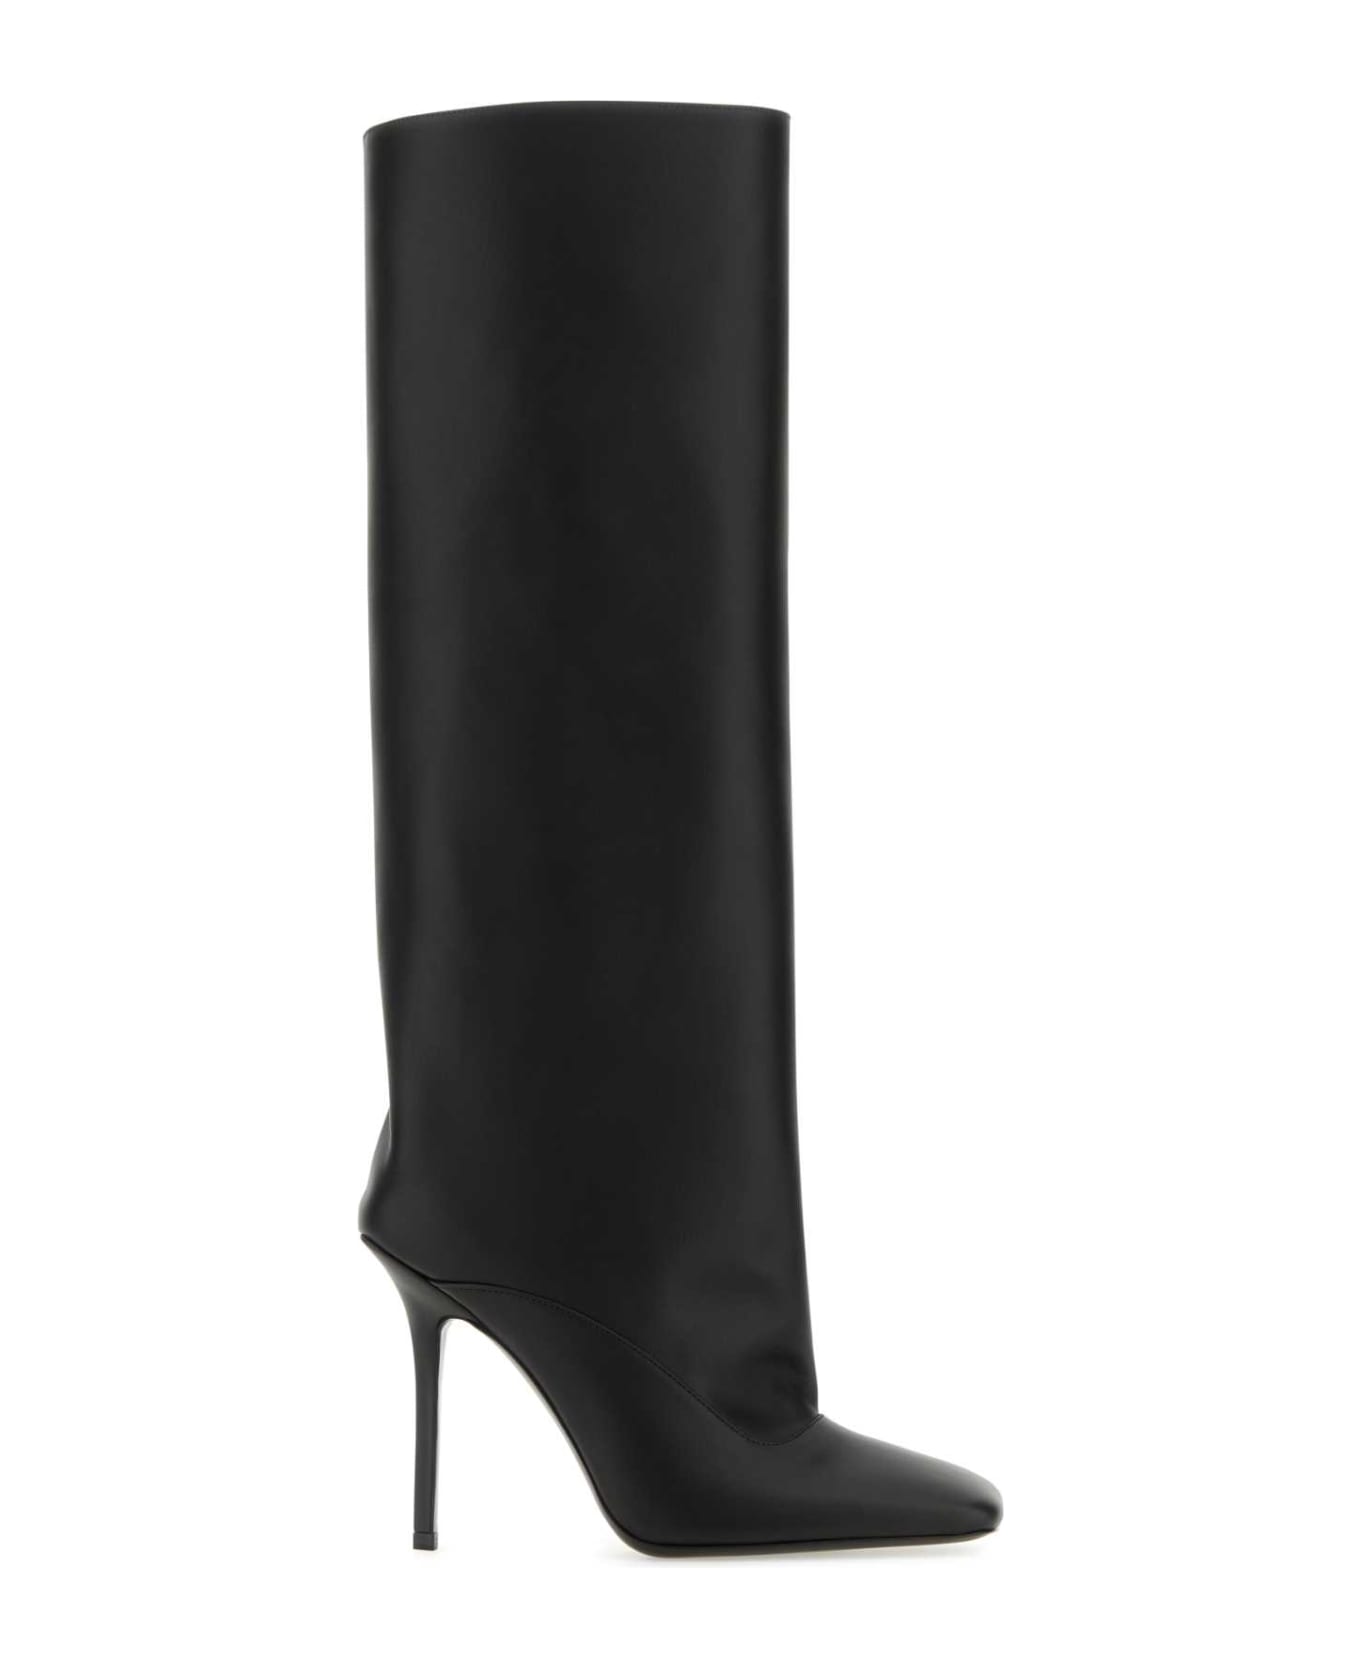 The Attico Black Leather Sienna Boots - 100